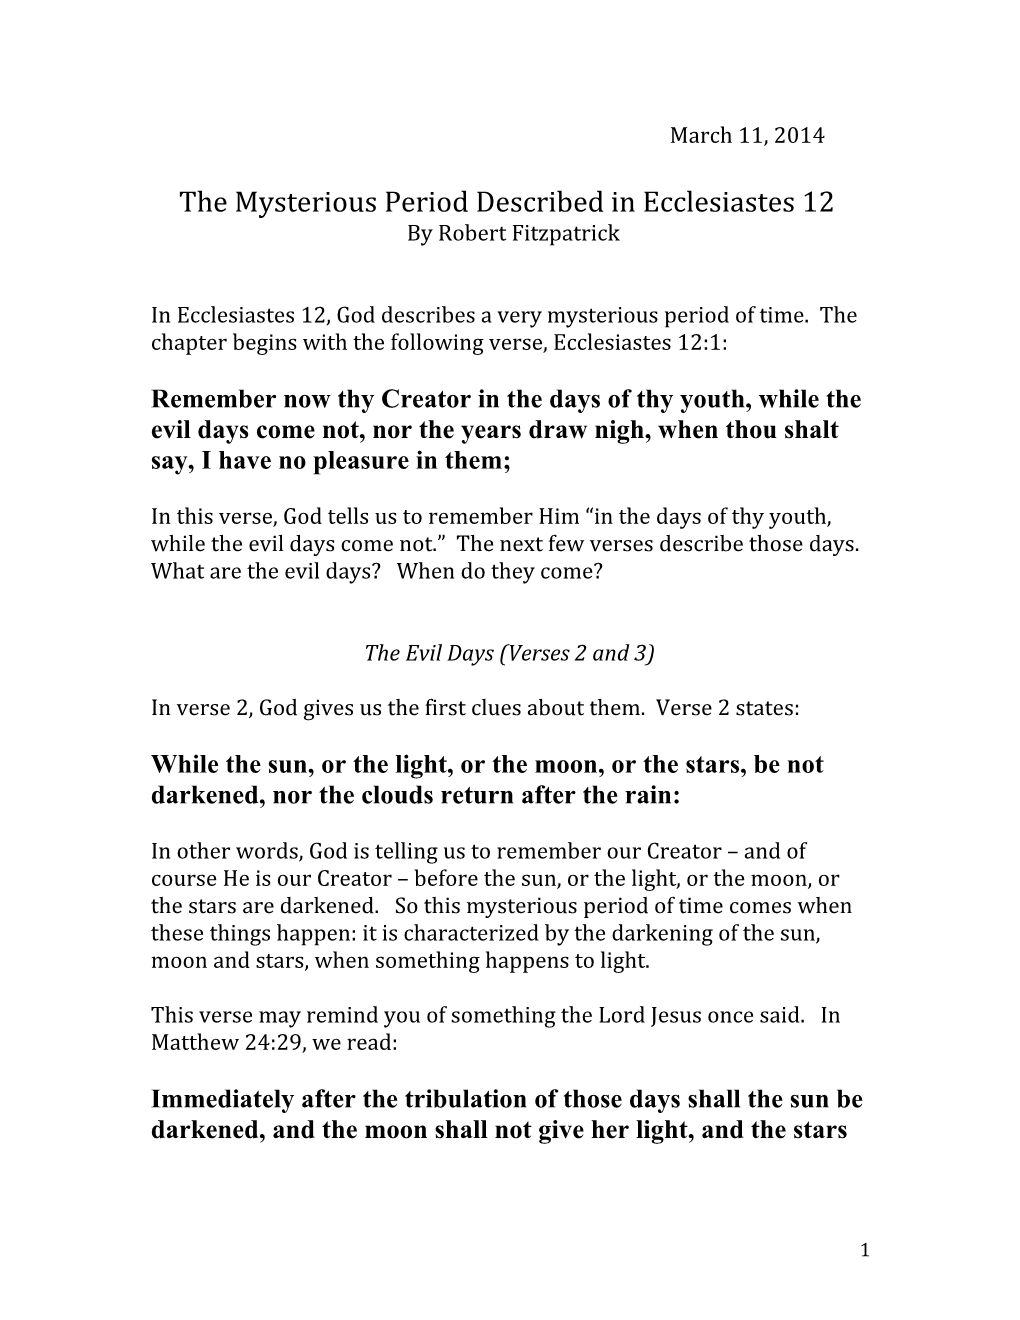 The Mysterious Period Described in Ecclesiastes 12